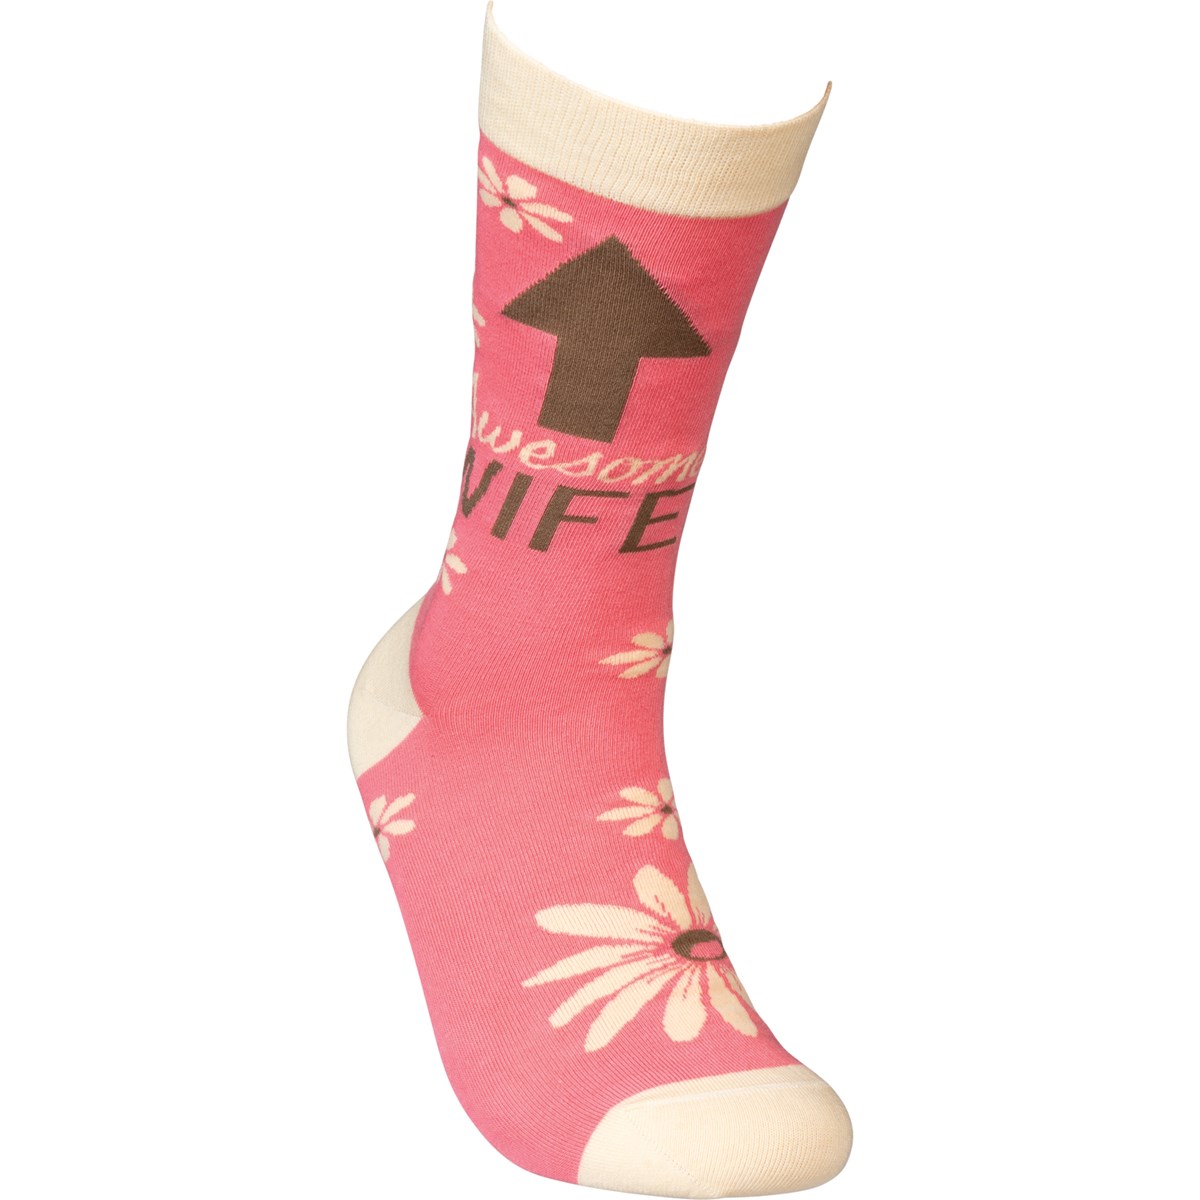 Socks - Awesome Wife - One Size Fits Most - Cotton, Nylon, Spandex